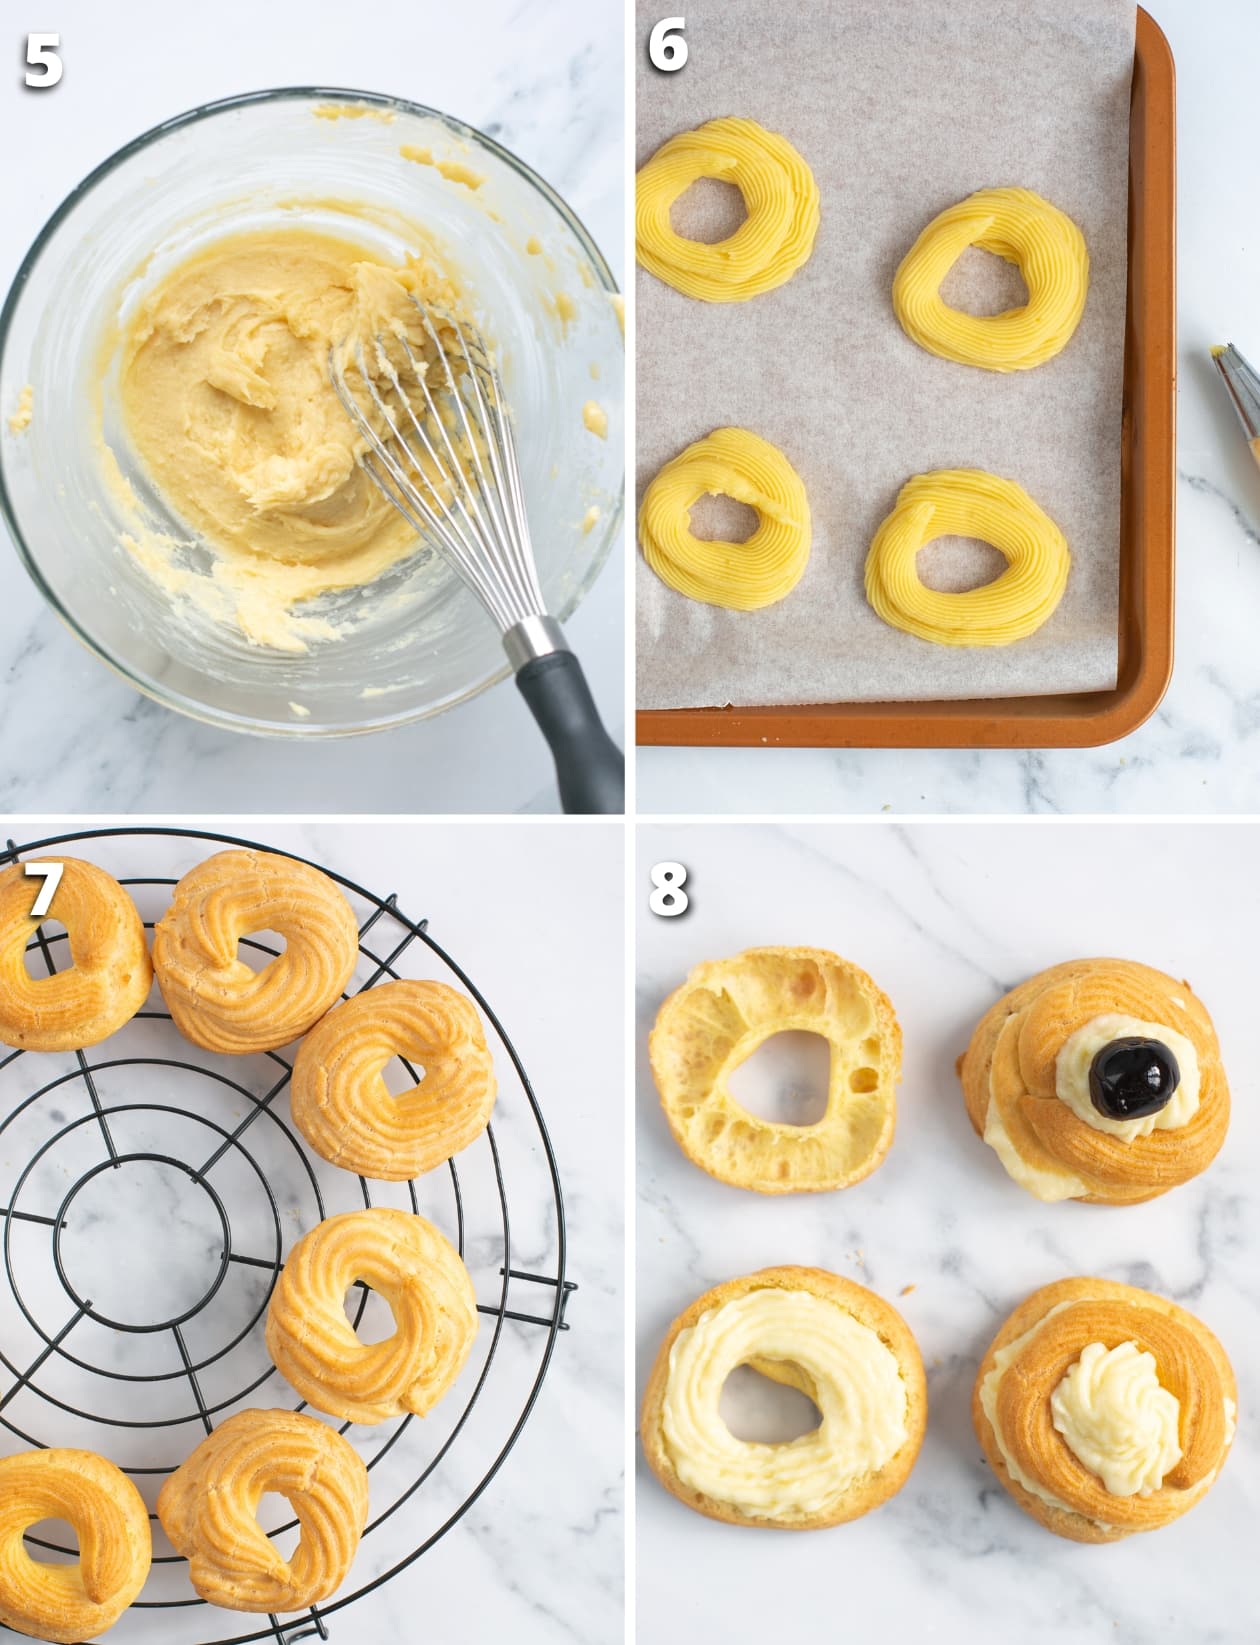 Collage of four images showing the last four steps to make st josep zeppole.